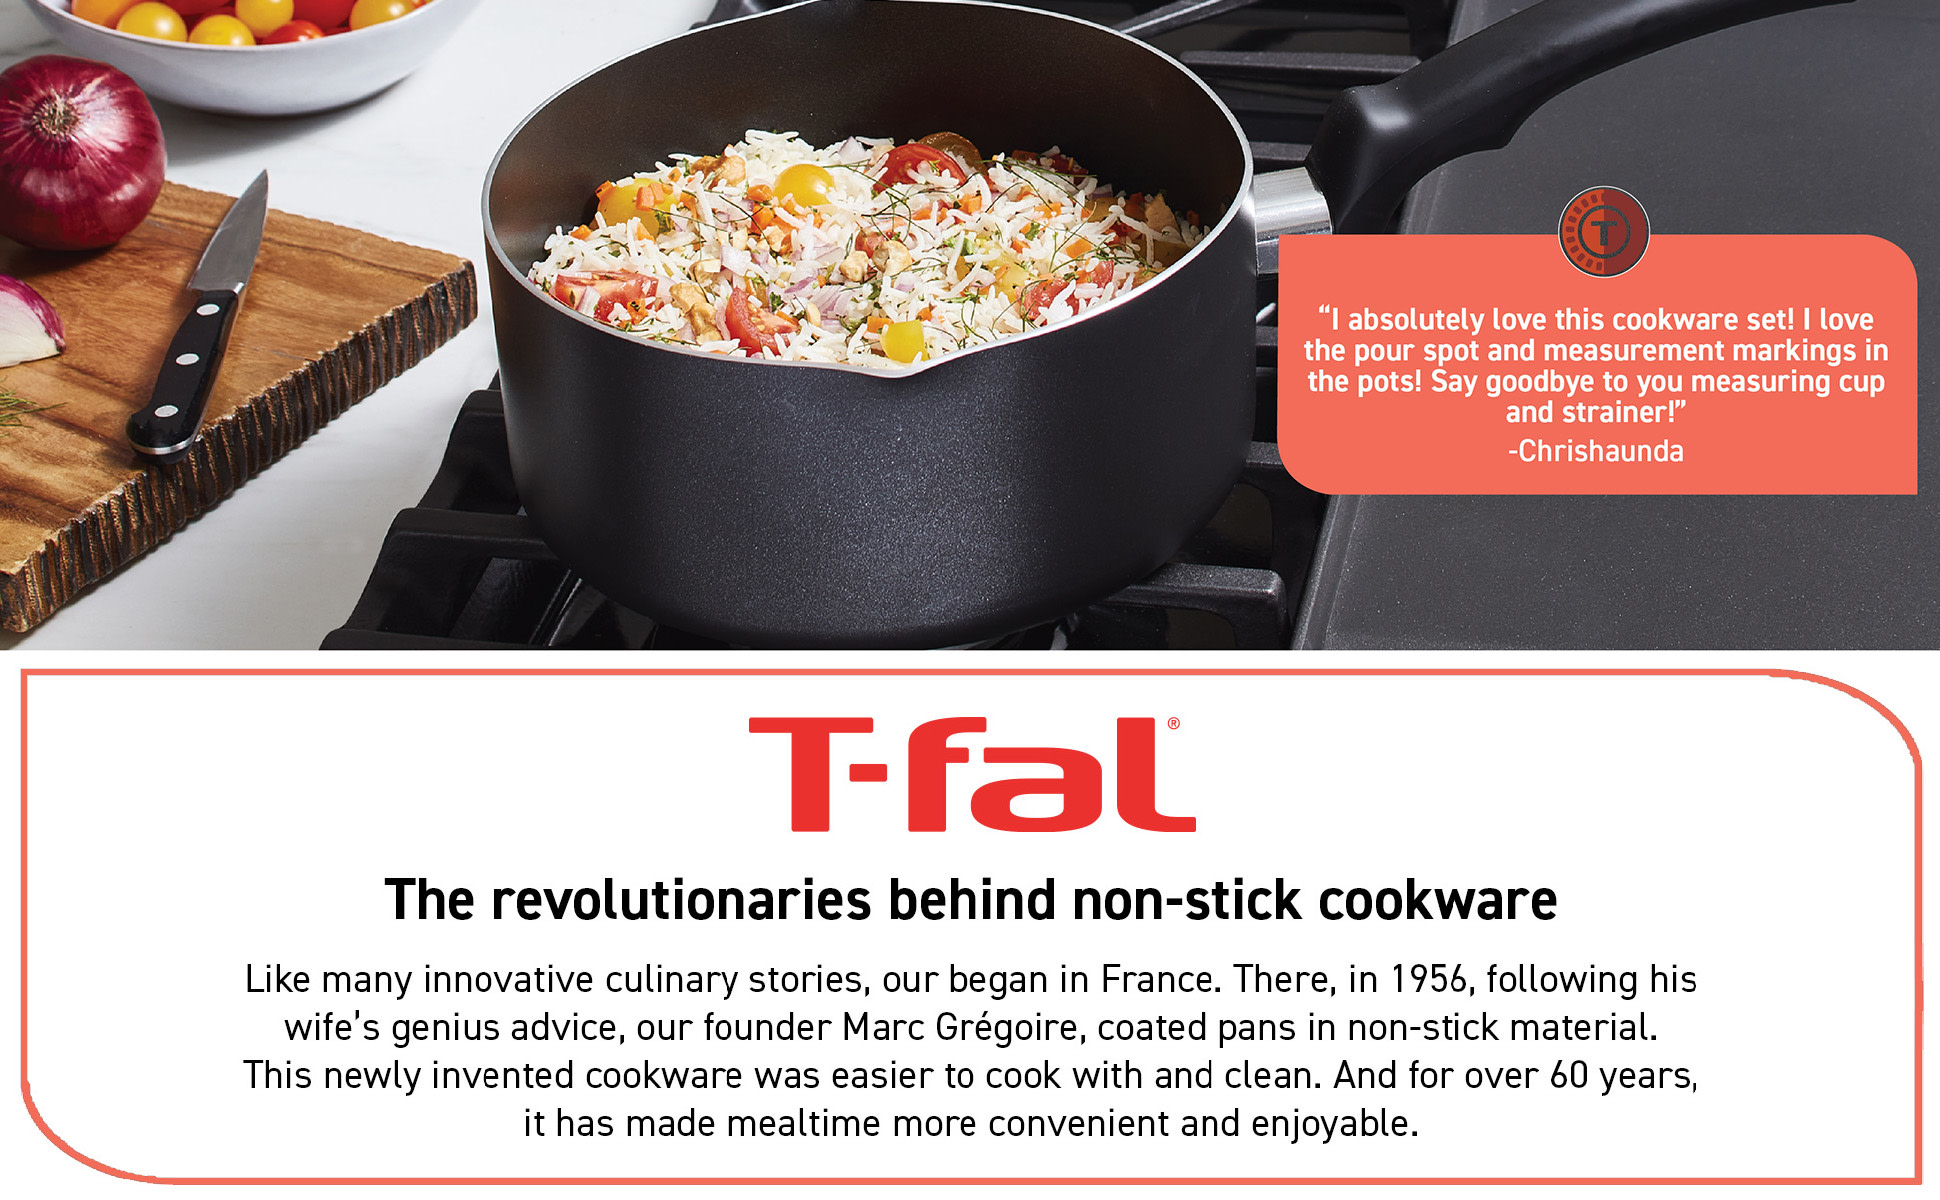 T-fal Cook & Strain Nonstick 2 Piece Fry Pan Cookware Set, 9.5 and